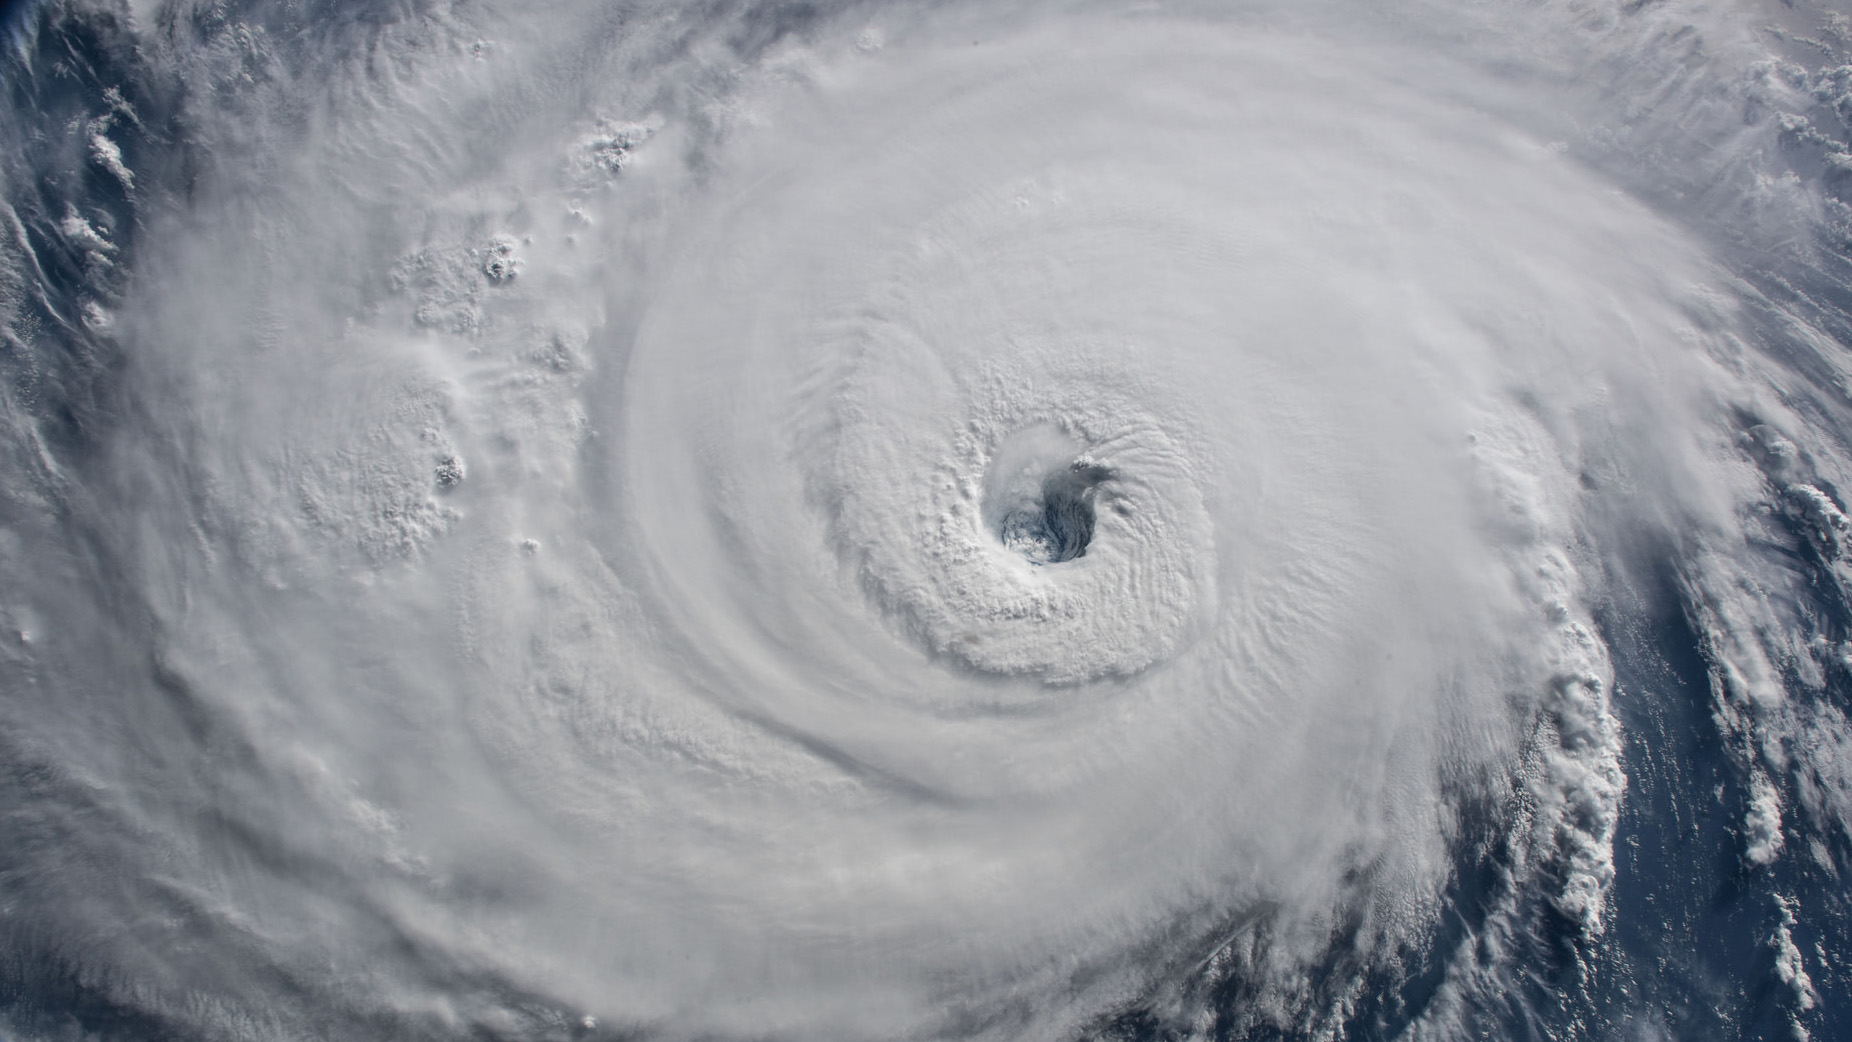 A satellite image of a hurricane